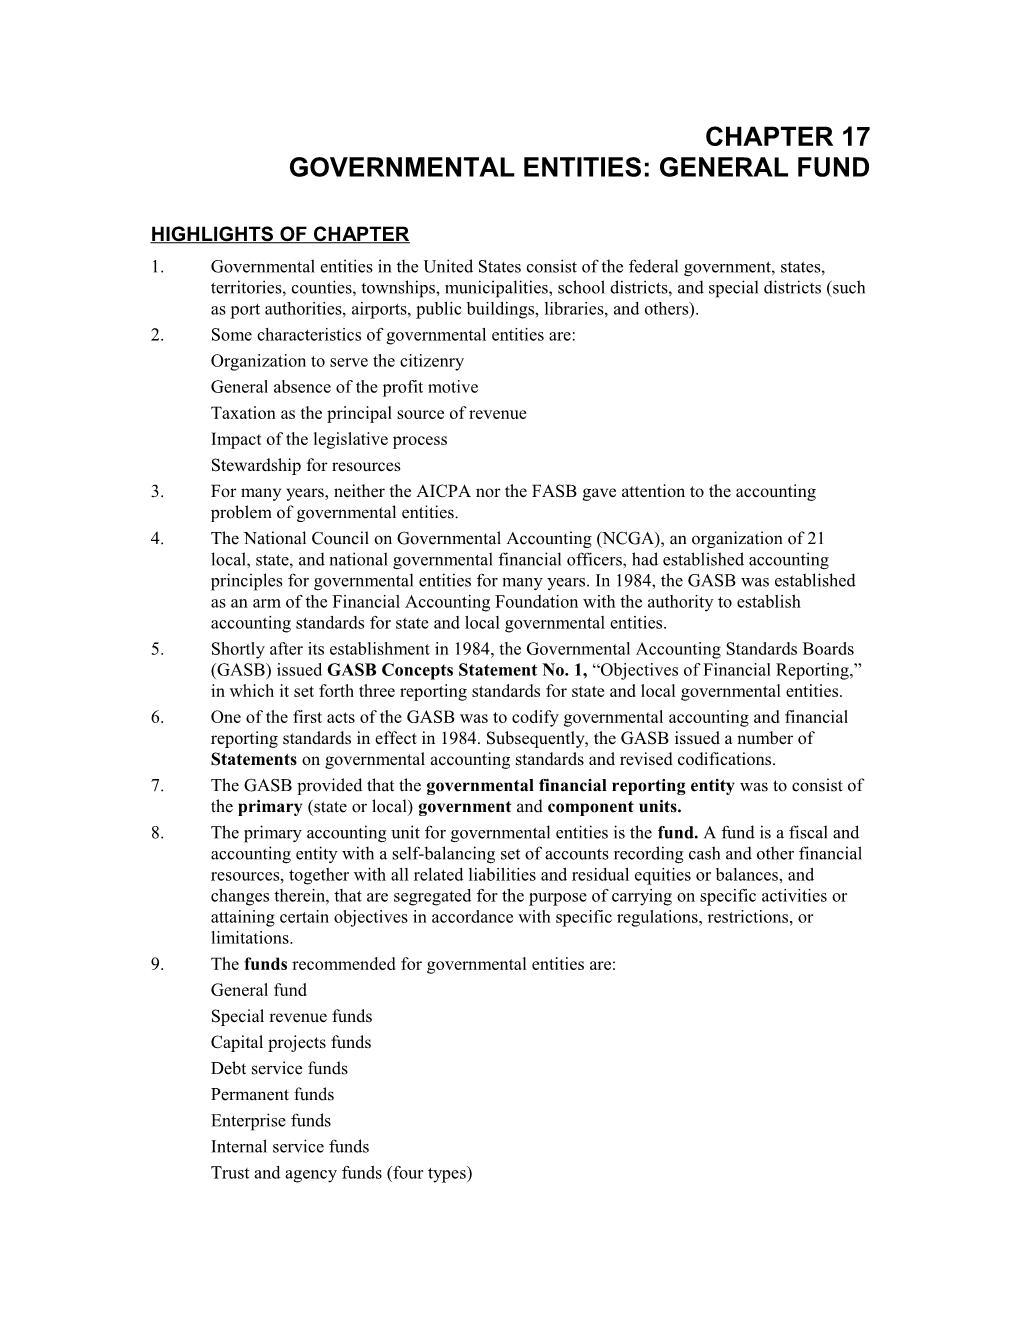 Governmental Entities: General Fund